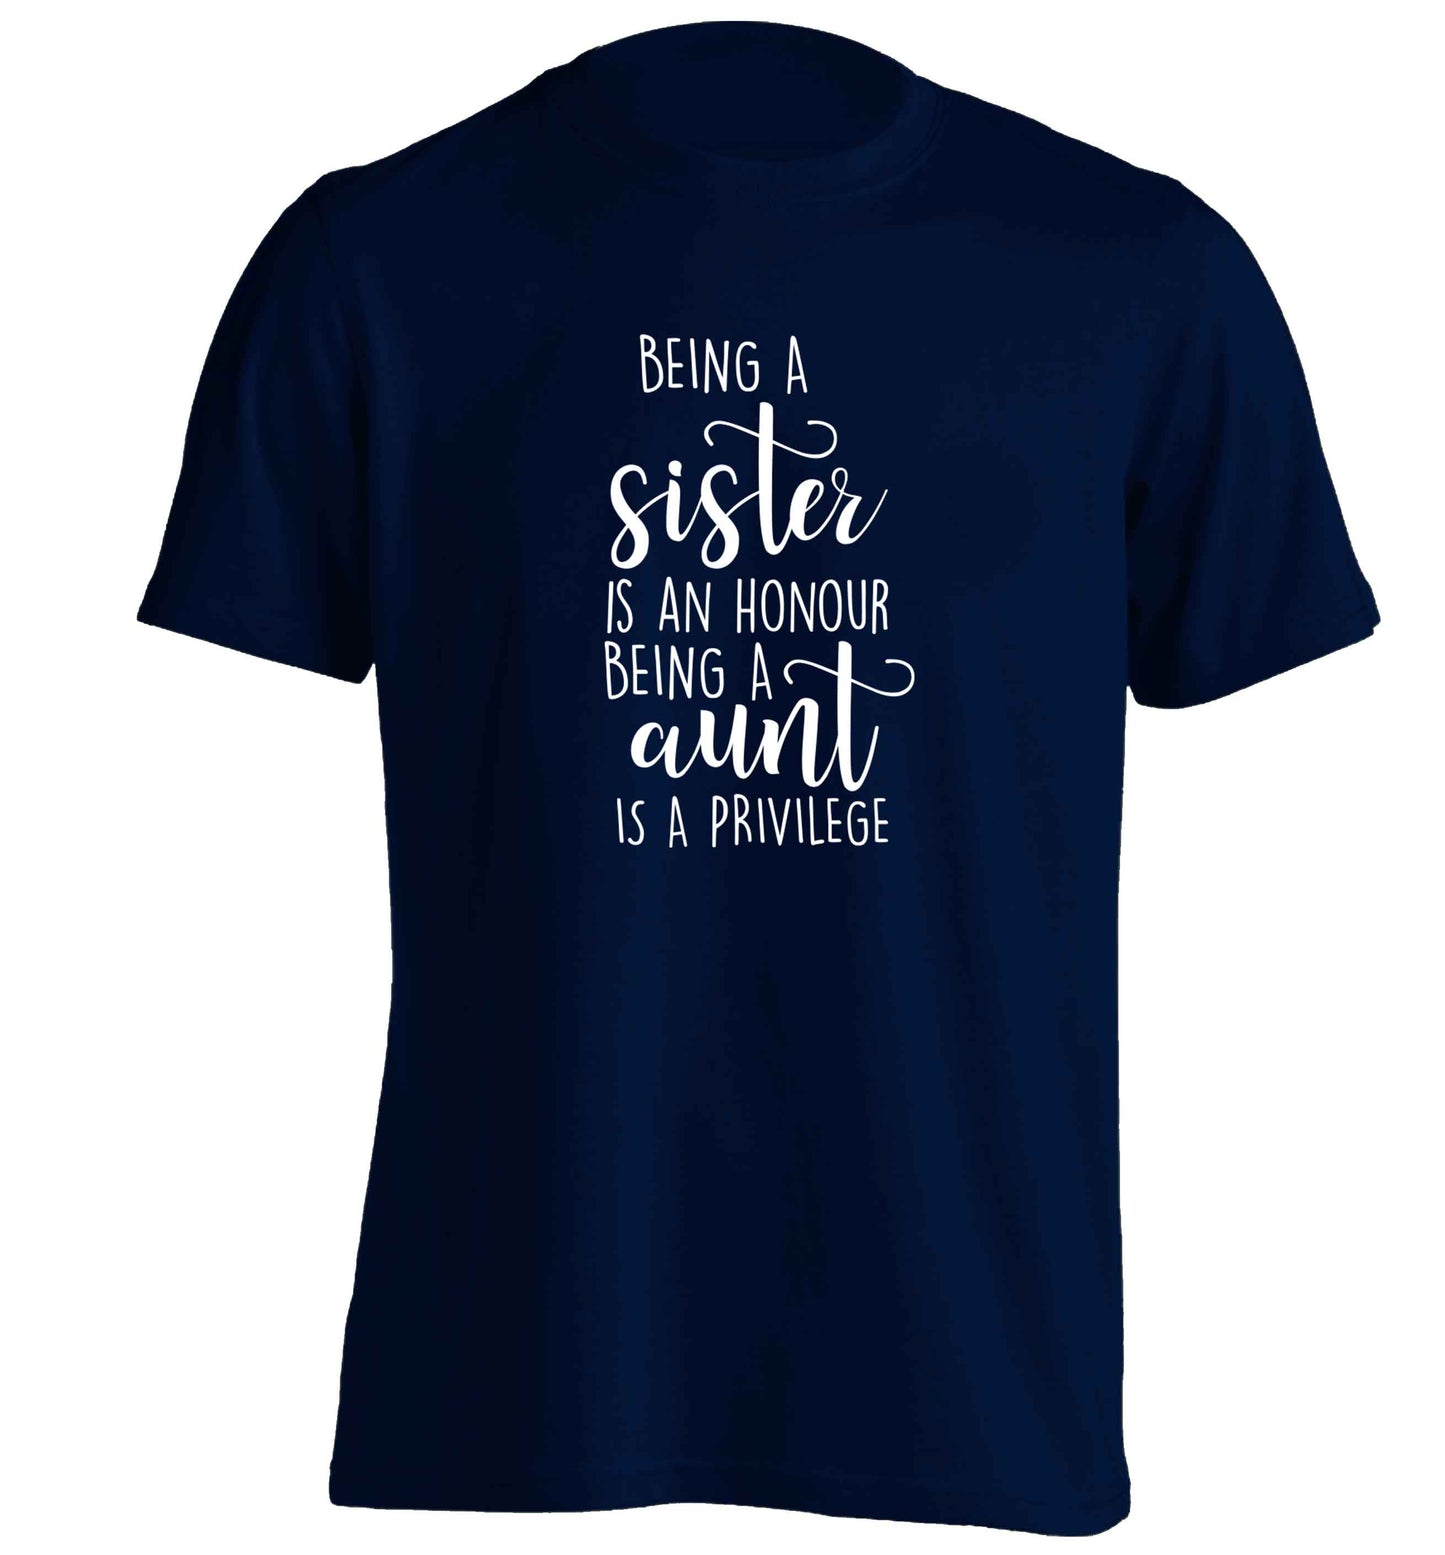 Being a sister is an honour being an auntie is a privilege adults unisex navy Tshirt 2XL